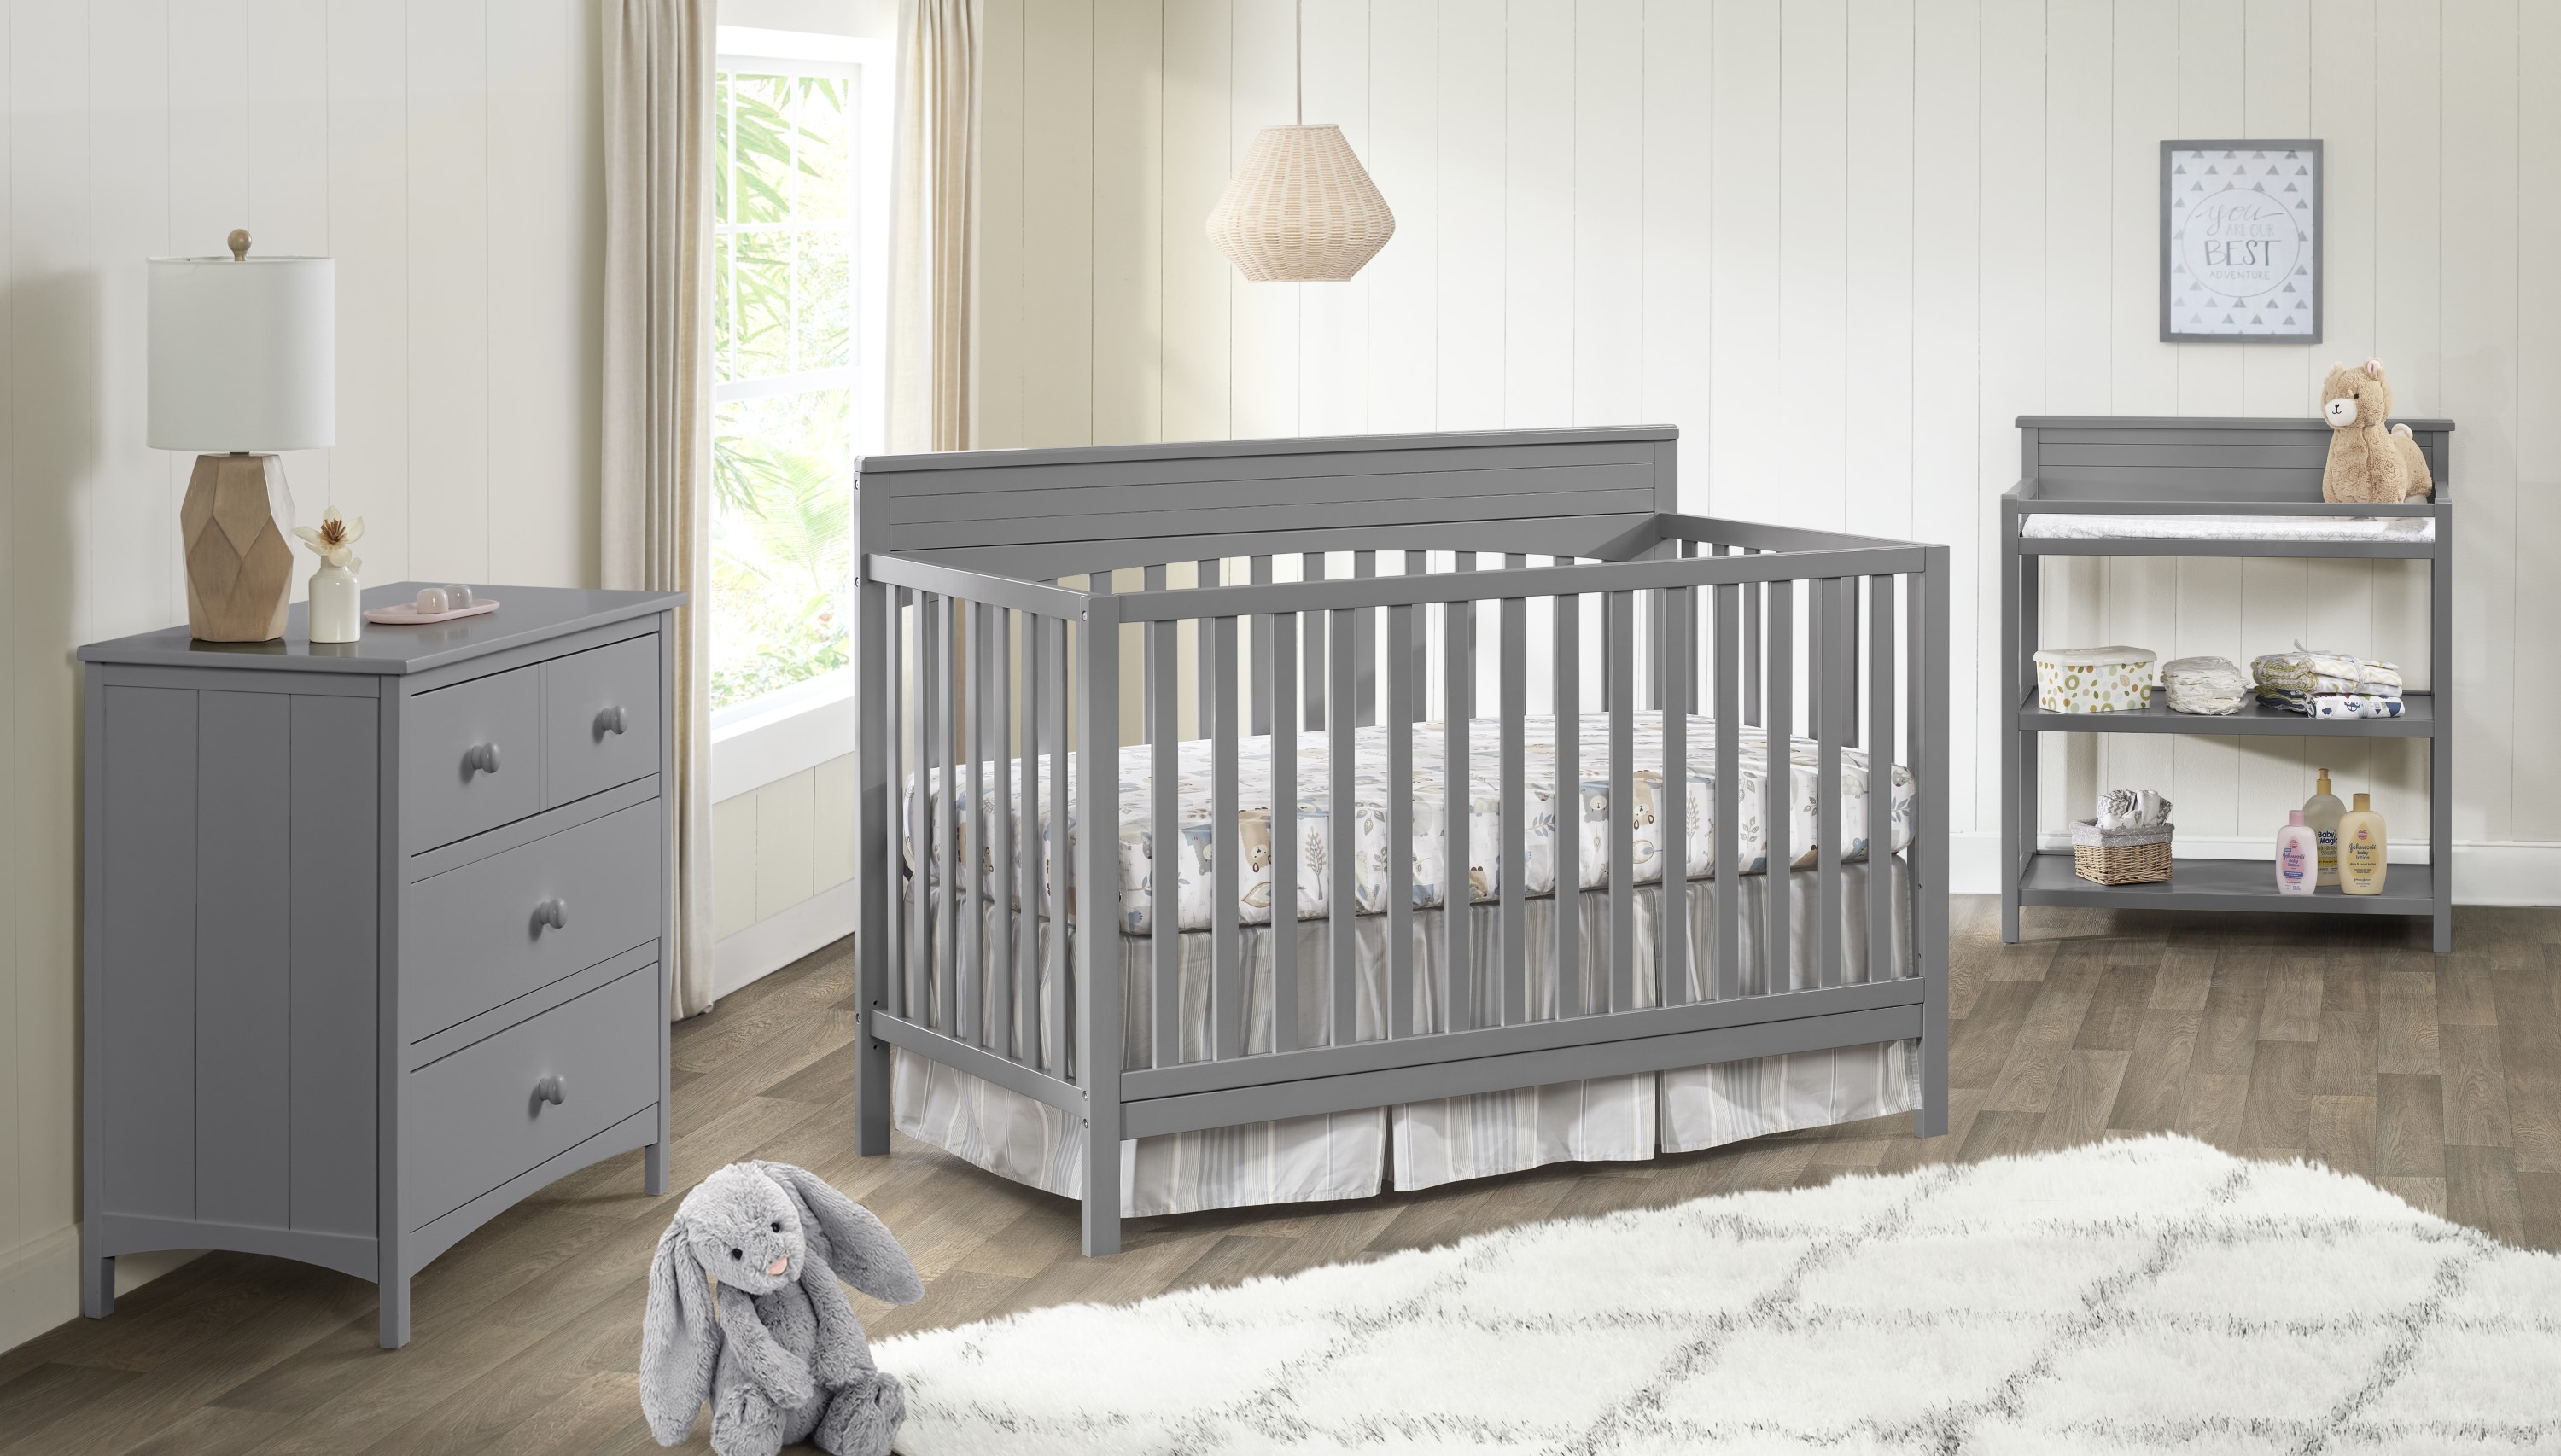 Oxford Baby Harper 4-in-1 Convertible Crib, Dove Gray, GREENGUARD Gold Certified, Wooden Crib - image 3 of 11